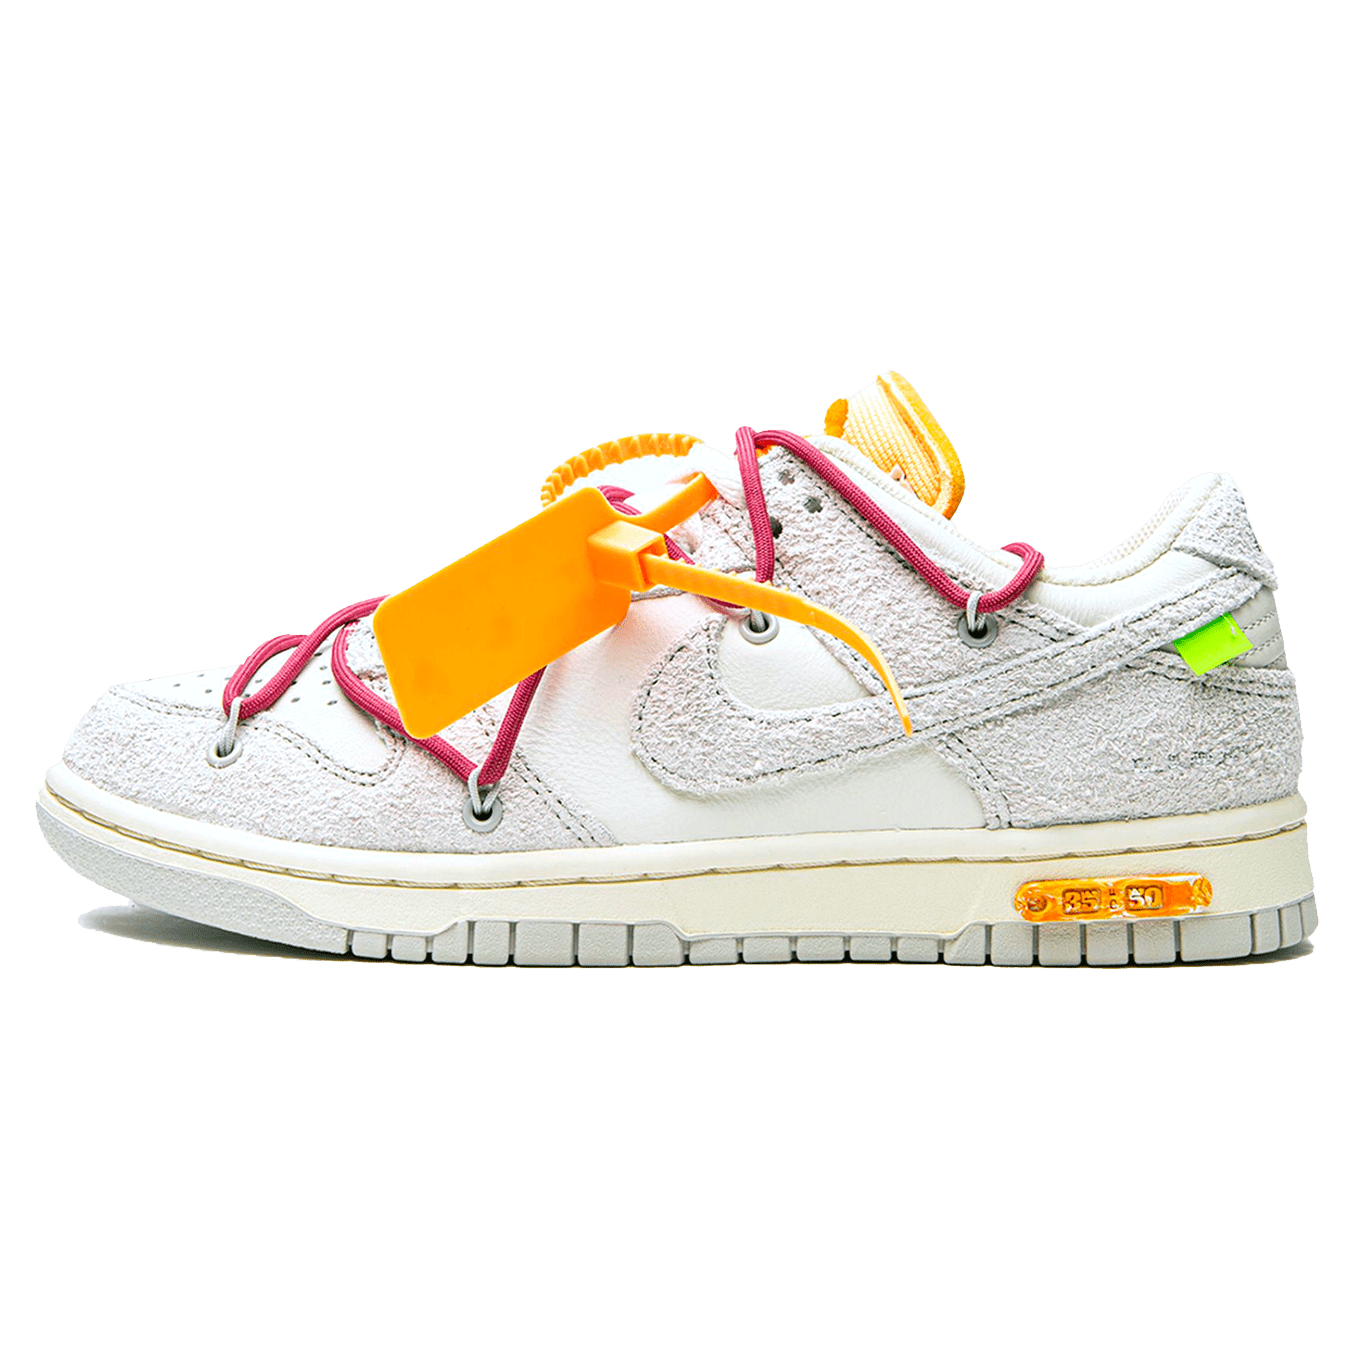 Off White x Nike Dunk Low Lot 35 of 50 DJ0950 114